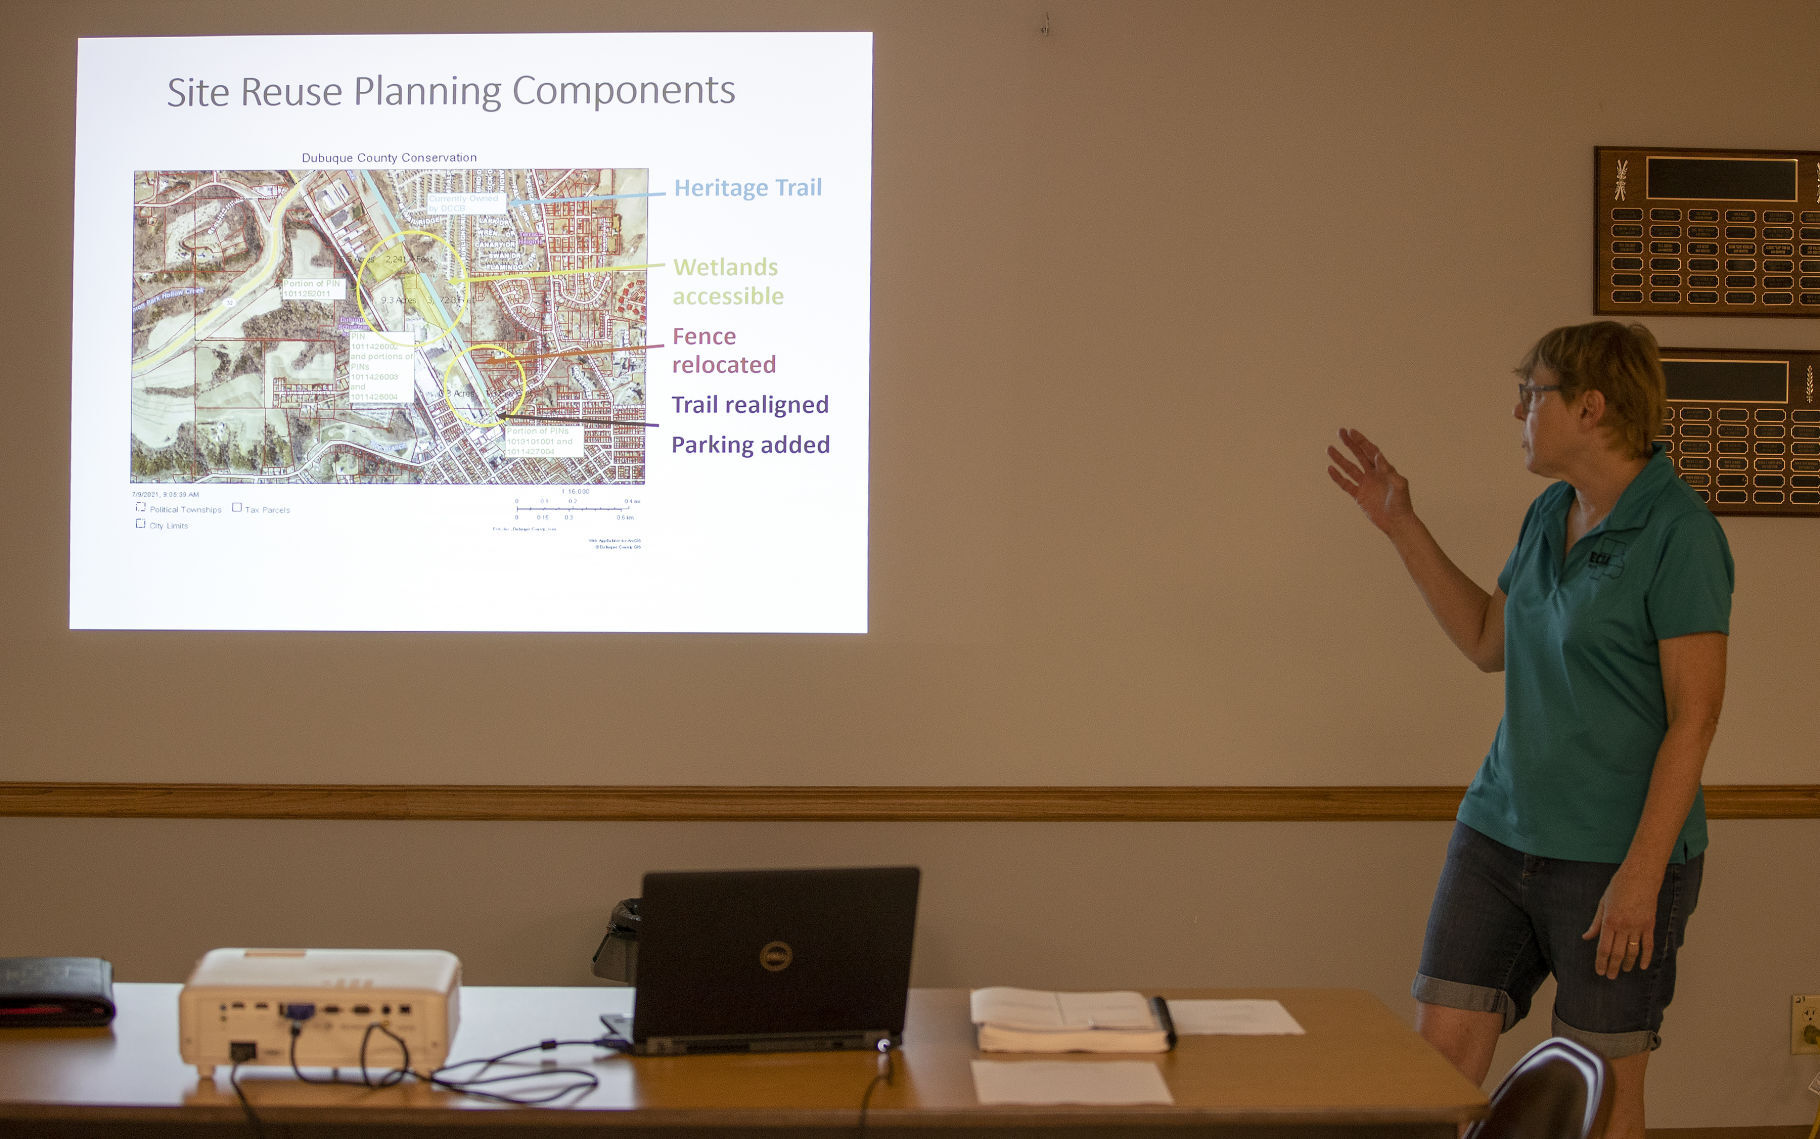 Laura Carstens, senior planner at East Central Intergovernmental Association, gives a presentation and asks for public input on possible utilization of the former Flexsteel Industries property on Jackson Street in Dubuque during a meeting on Thursday, July 29, 2021.    PHOTO CREDIT: Stephen Gassman